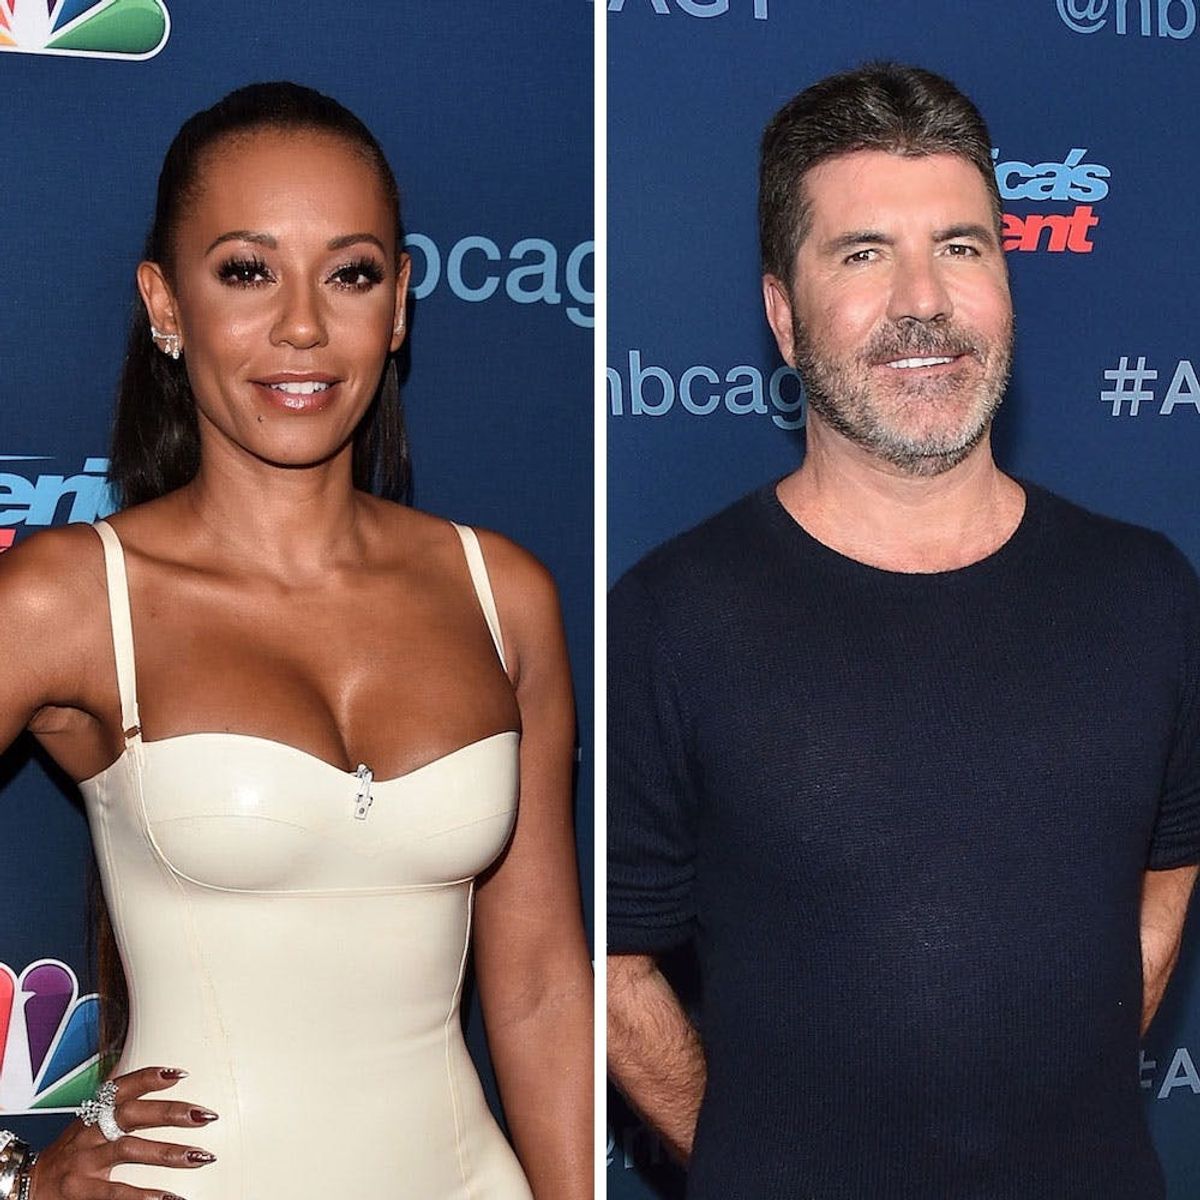 Mel B Stormed Off the “America’s Got Talent” Stage After Simon Cowell’s Comment About Her Wedding Night